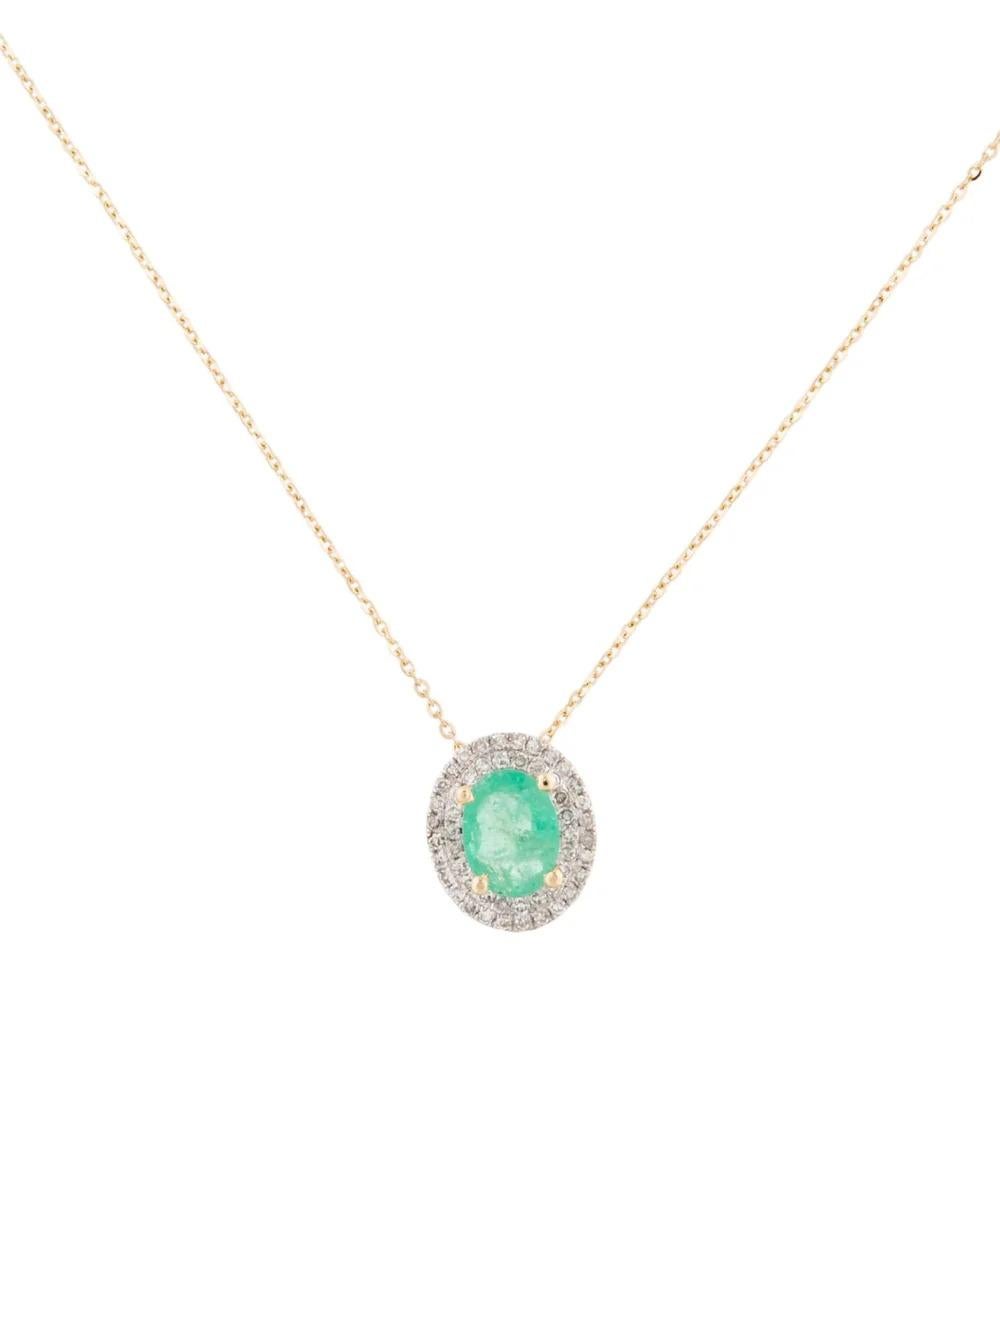 Experience timeless elegance with this exquisite 14K Yellow Gold Necklace featuring a stunning Emerald and Diamond centerpiece. Crafted with precision and care, this fine jewelry piece is designed to captivate and enchant. 

Specifications:

* Metal